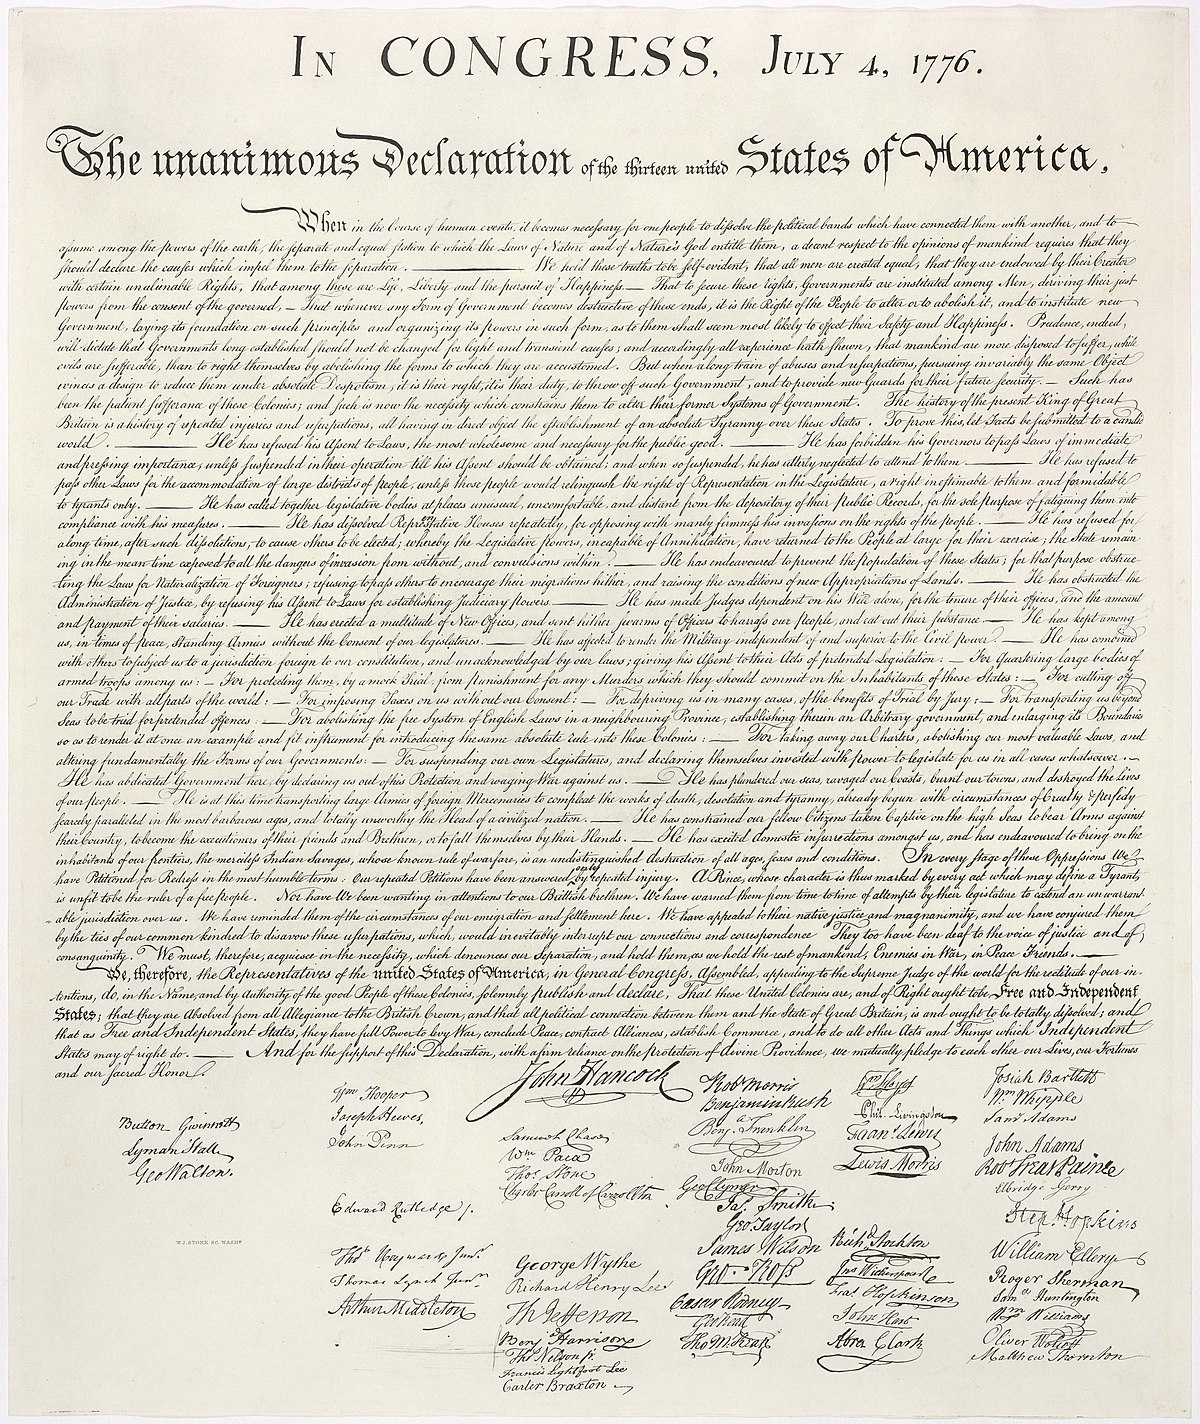 A picture of the Declaration of Independence